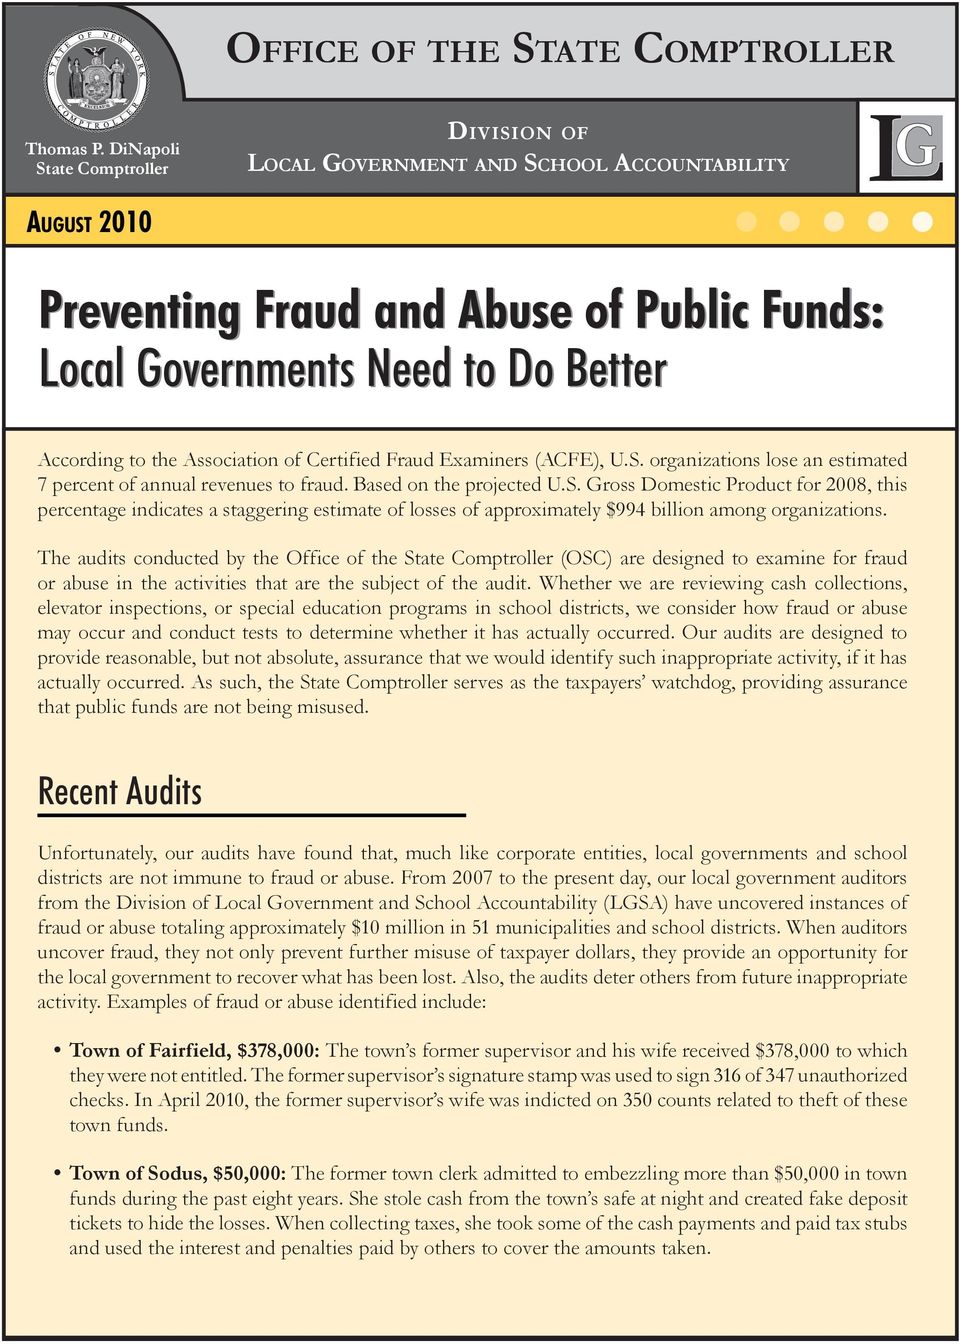 Association of Certified Fraud Examiners (ACFE), U.S. organizations lose an estimated 7 percent of annual revenues to fraud. Based on the projected U.S. Gross Domestic Product for 2008, this percentage indicates a staggering estimate of losses of approximately $994 billion among organizations.